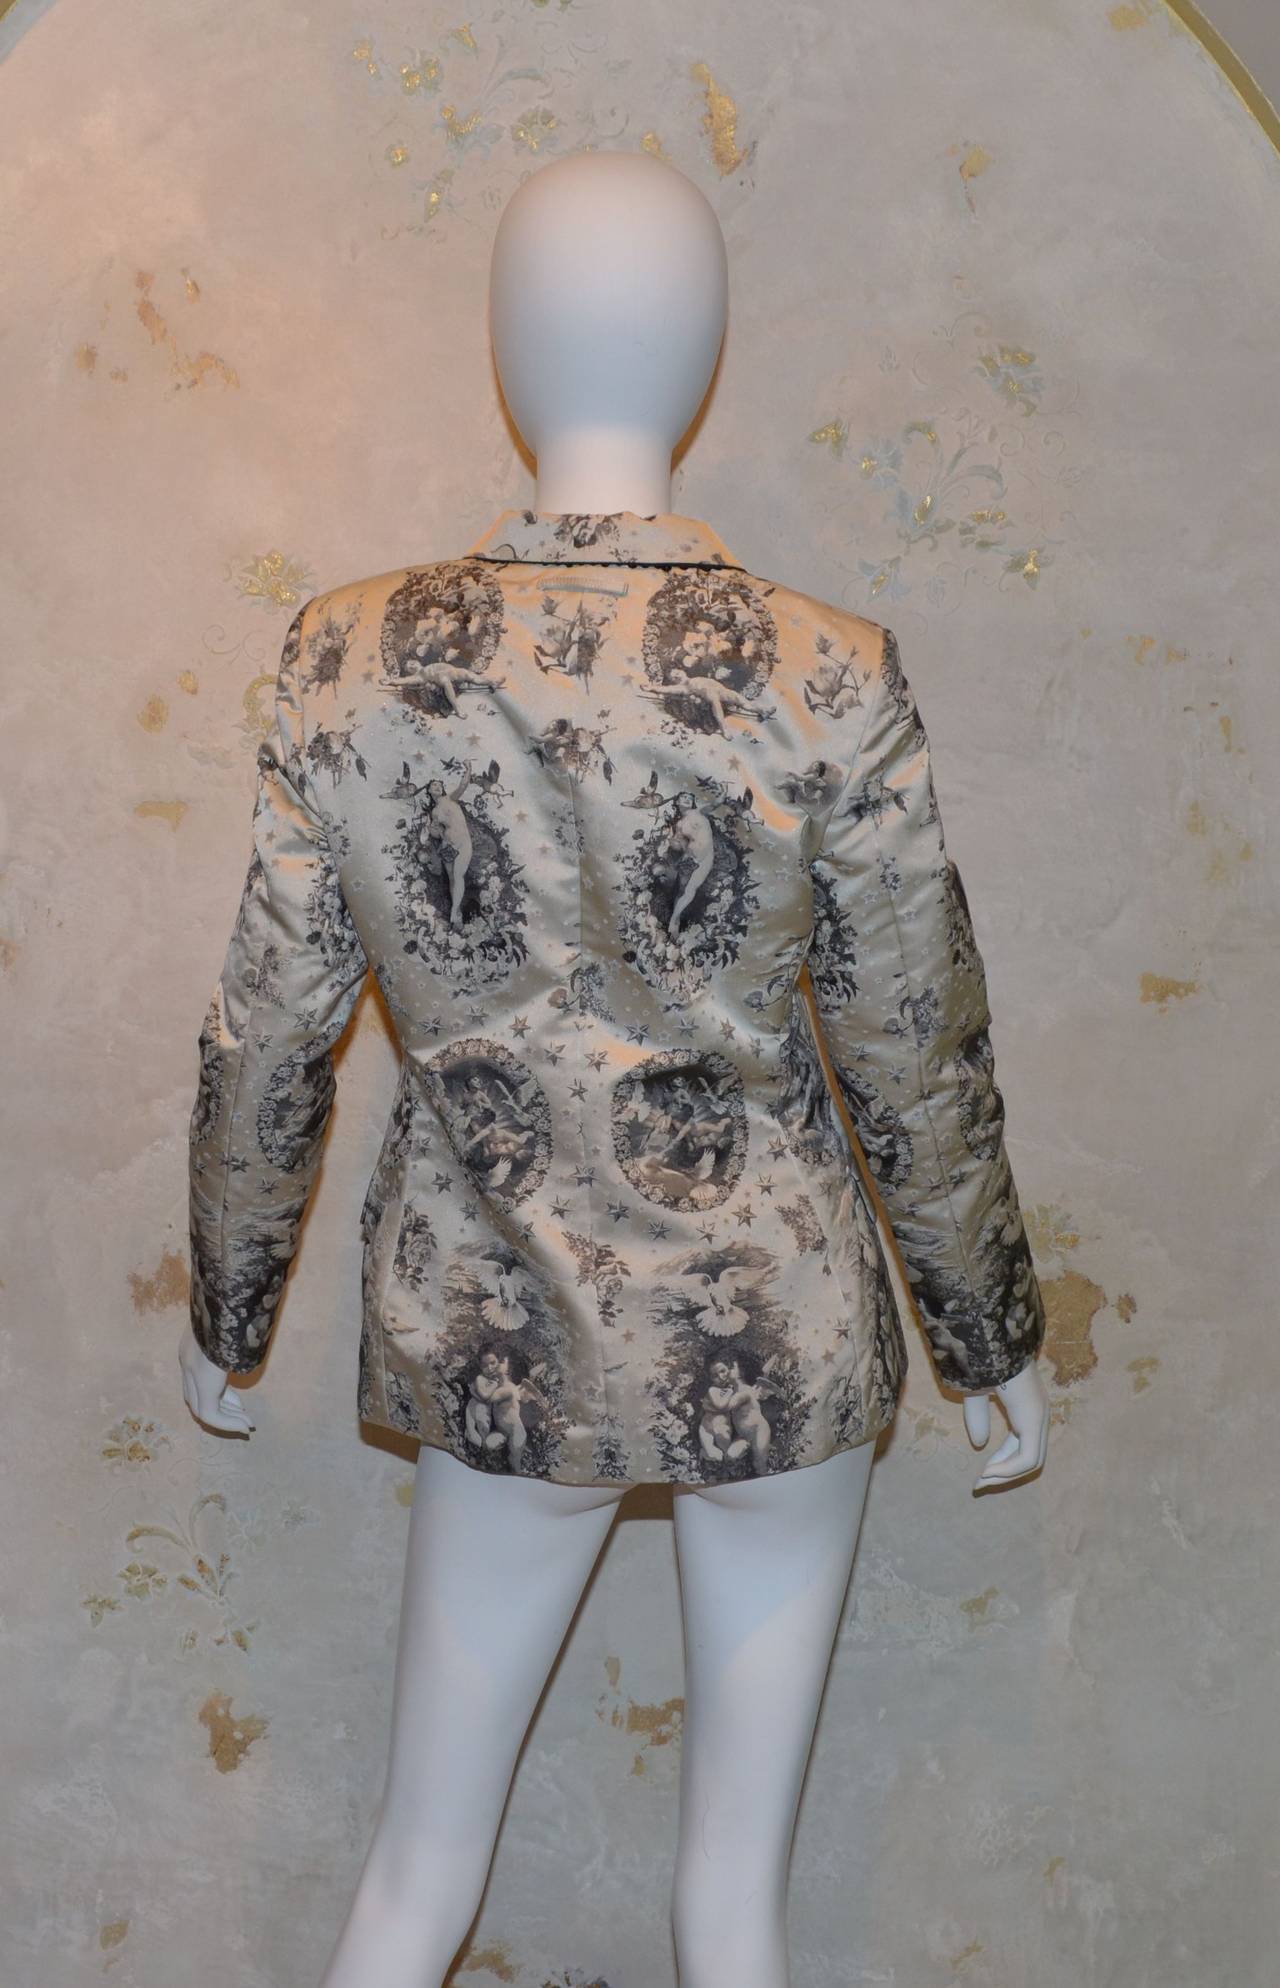 Jean Paul Gaultier blazer features a 'cherub' print throughout with concealed button closures along the front, and a fun sequin detailing under the collar as pictured. Blazer includes 2 slip pockets near the hem and one pocket at the left bust. Made